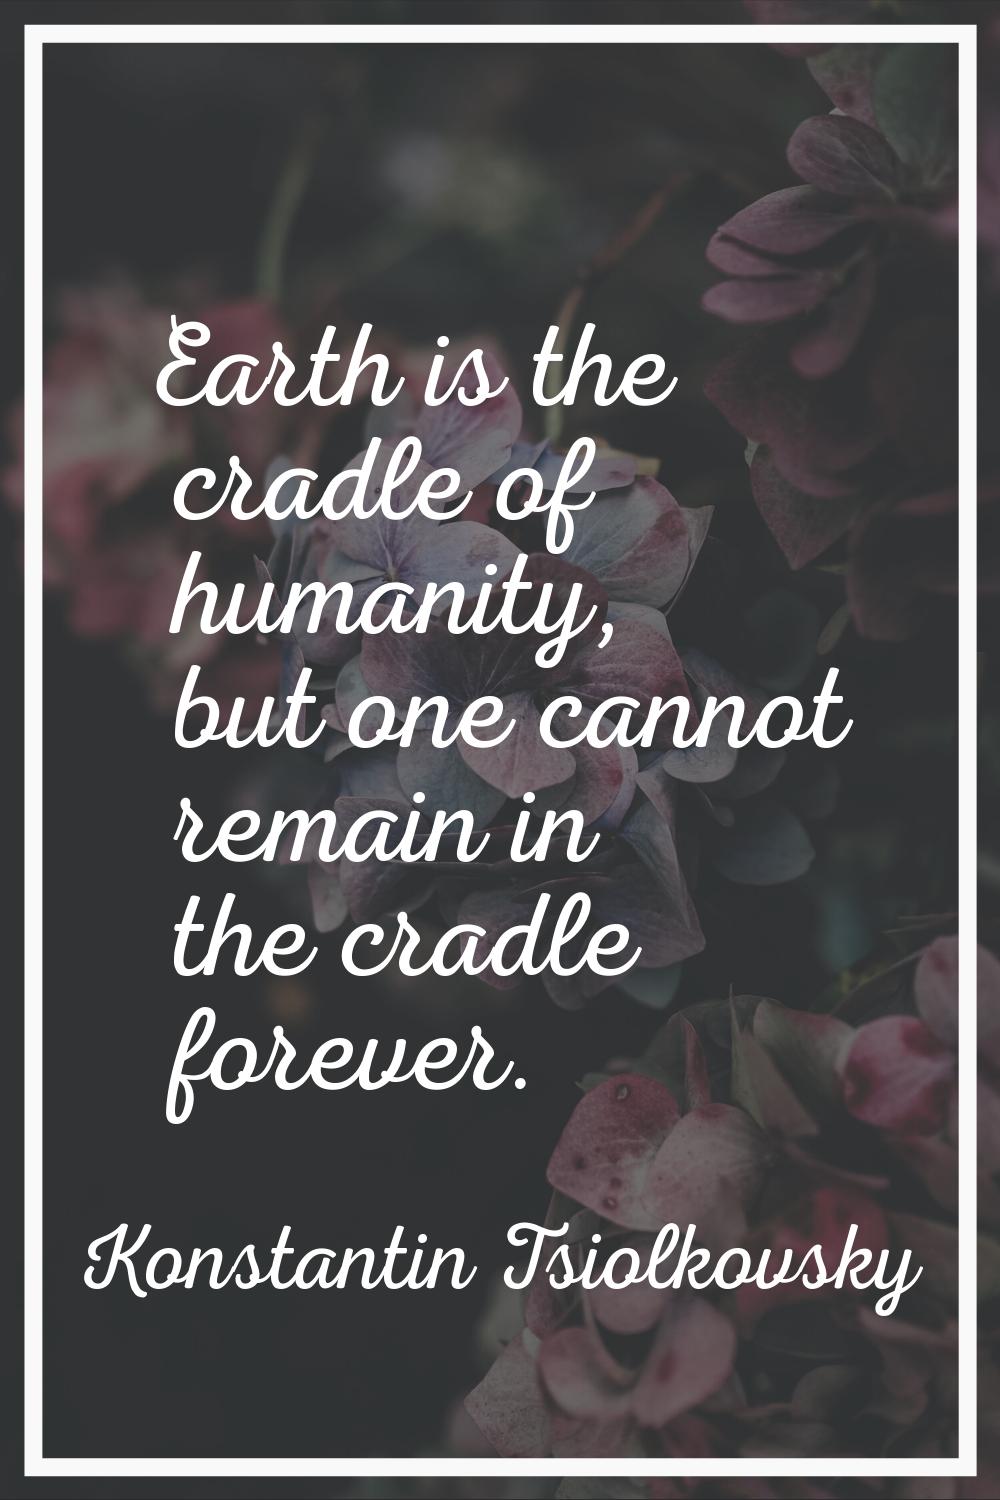 Earth is the cradle of humanity, but one cannot remain in the cradle forever.